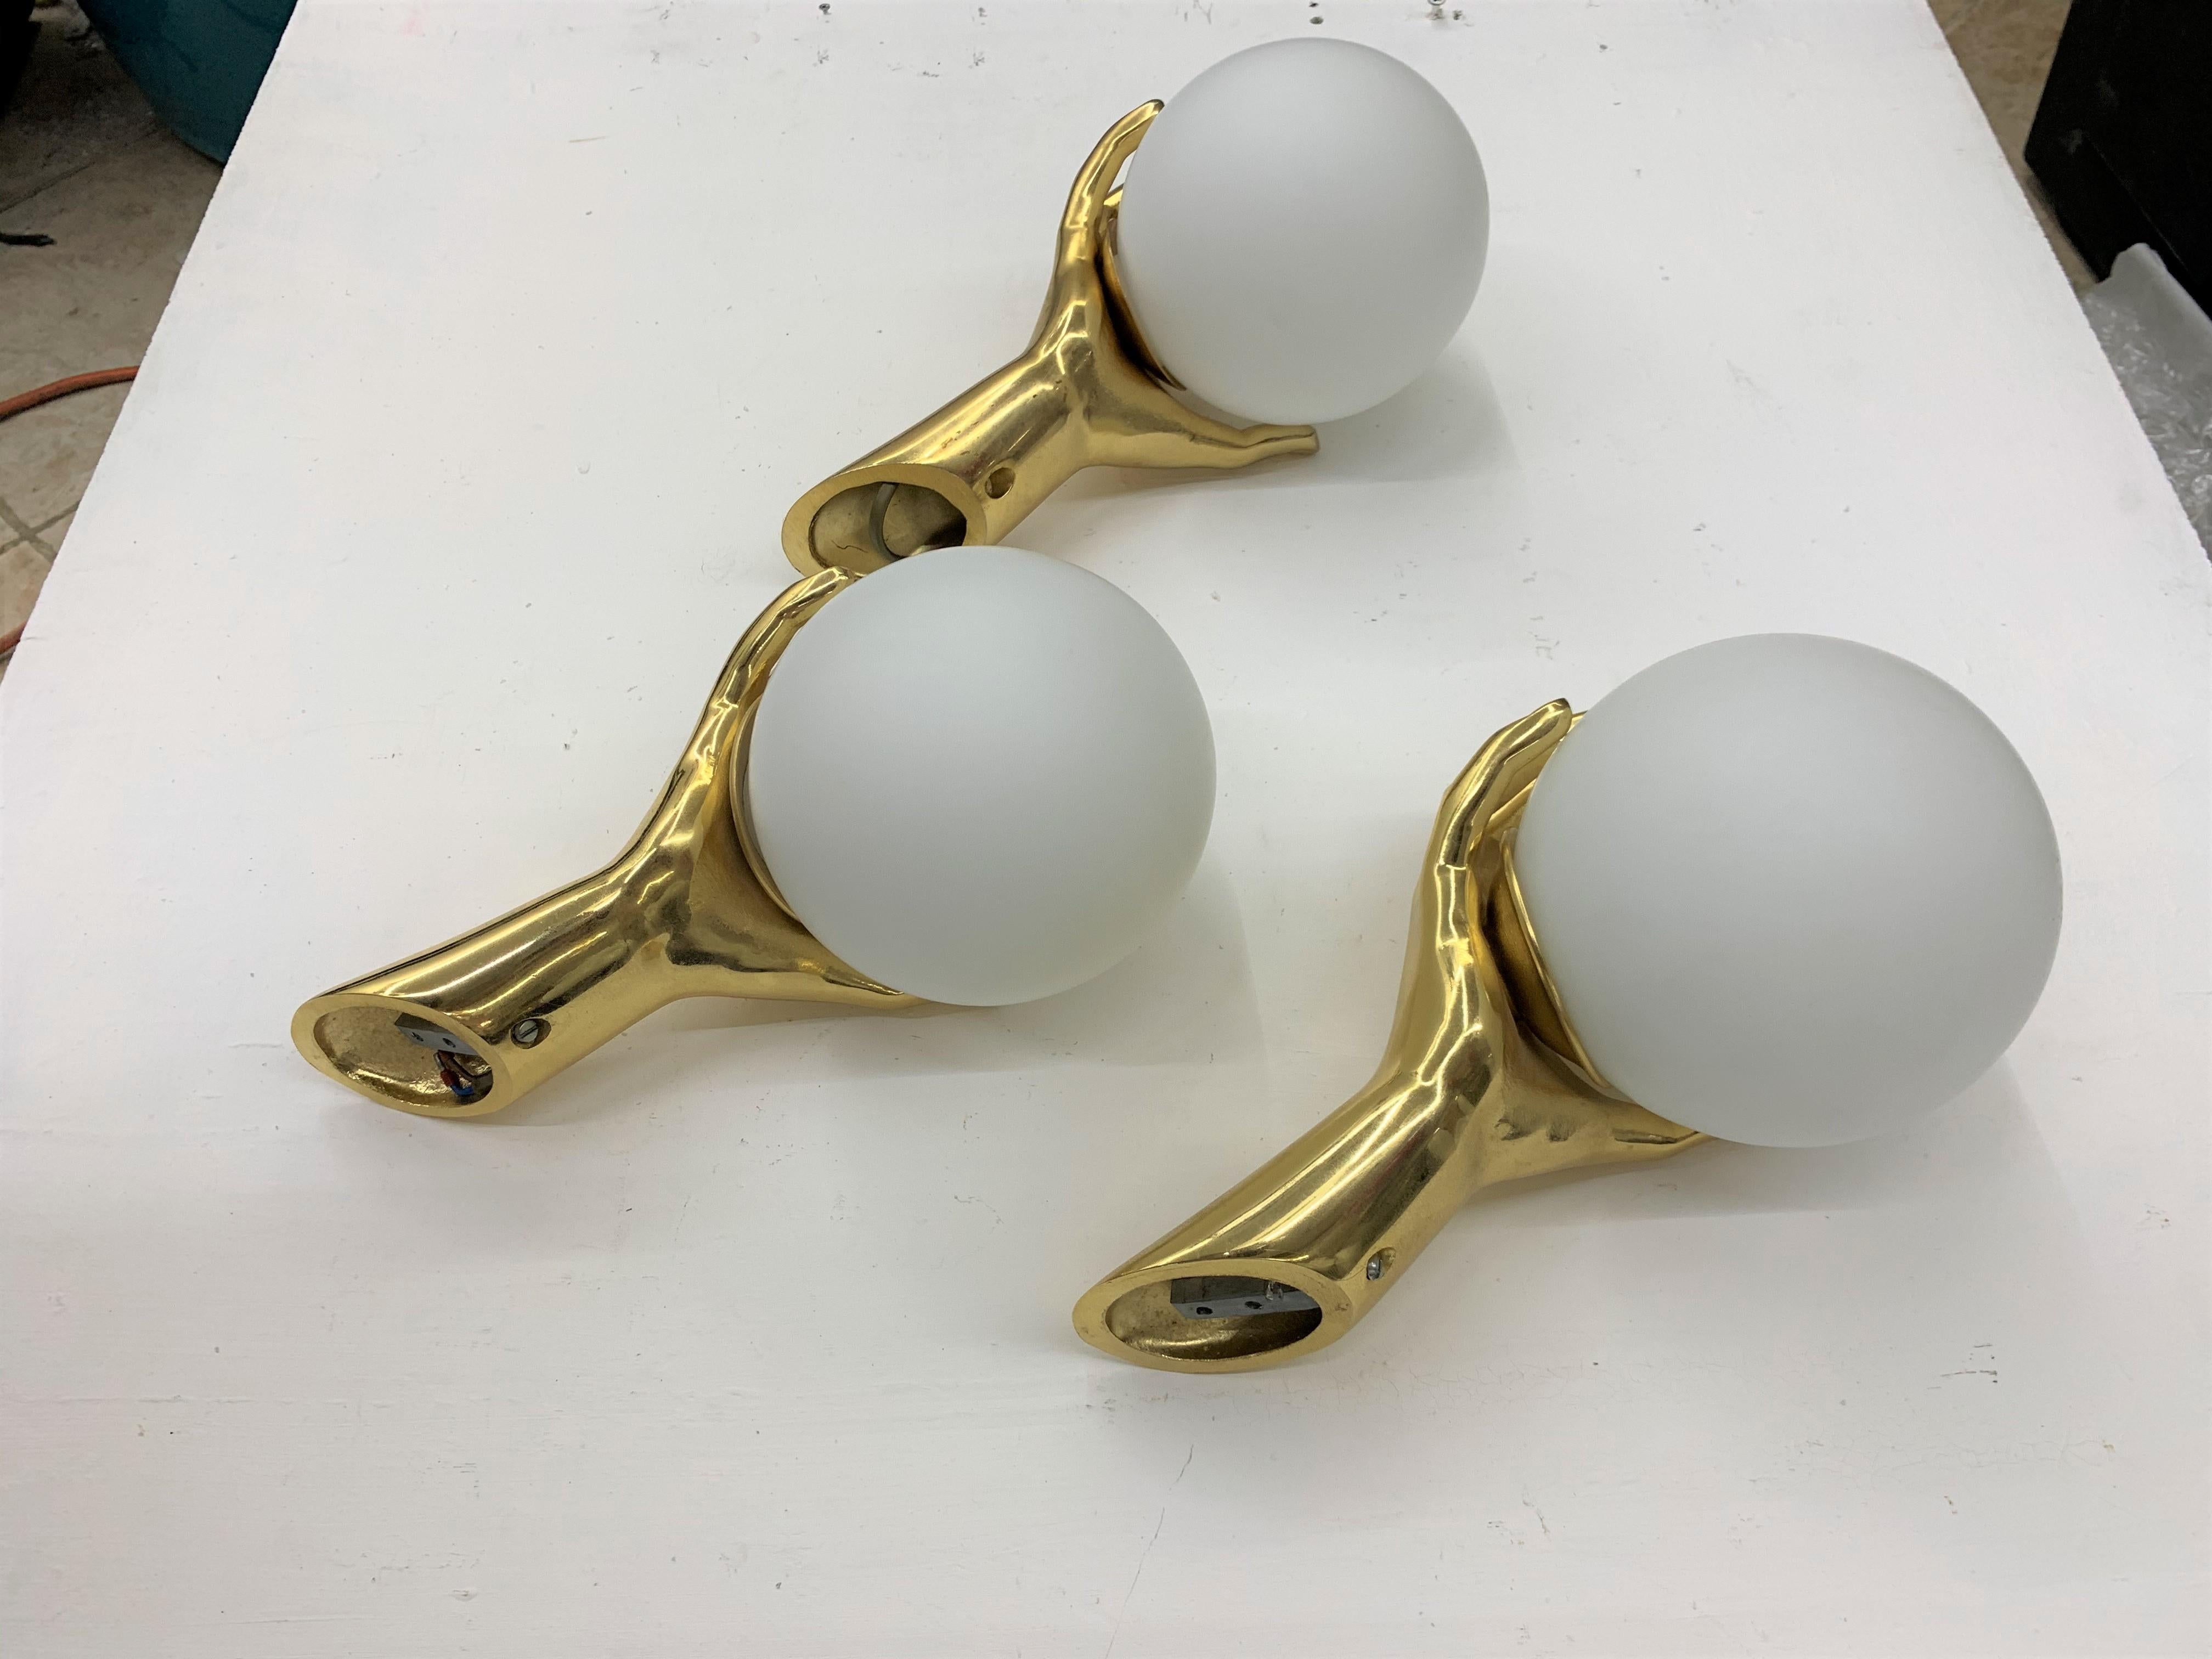 Modernist Sconces by Maison Arlus in Gilt Bronze and Opaline Glass, France 1